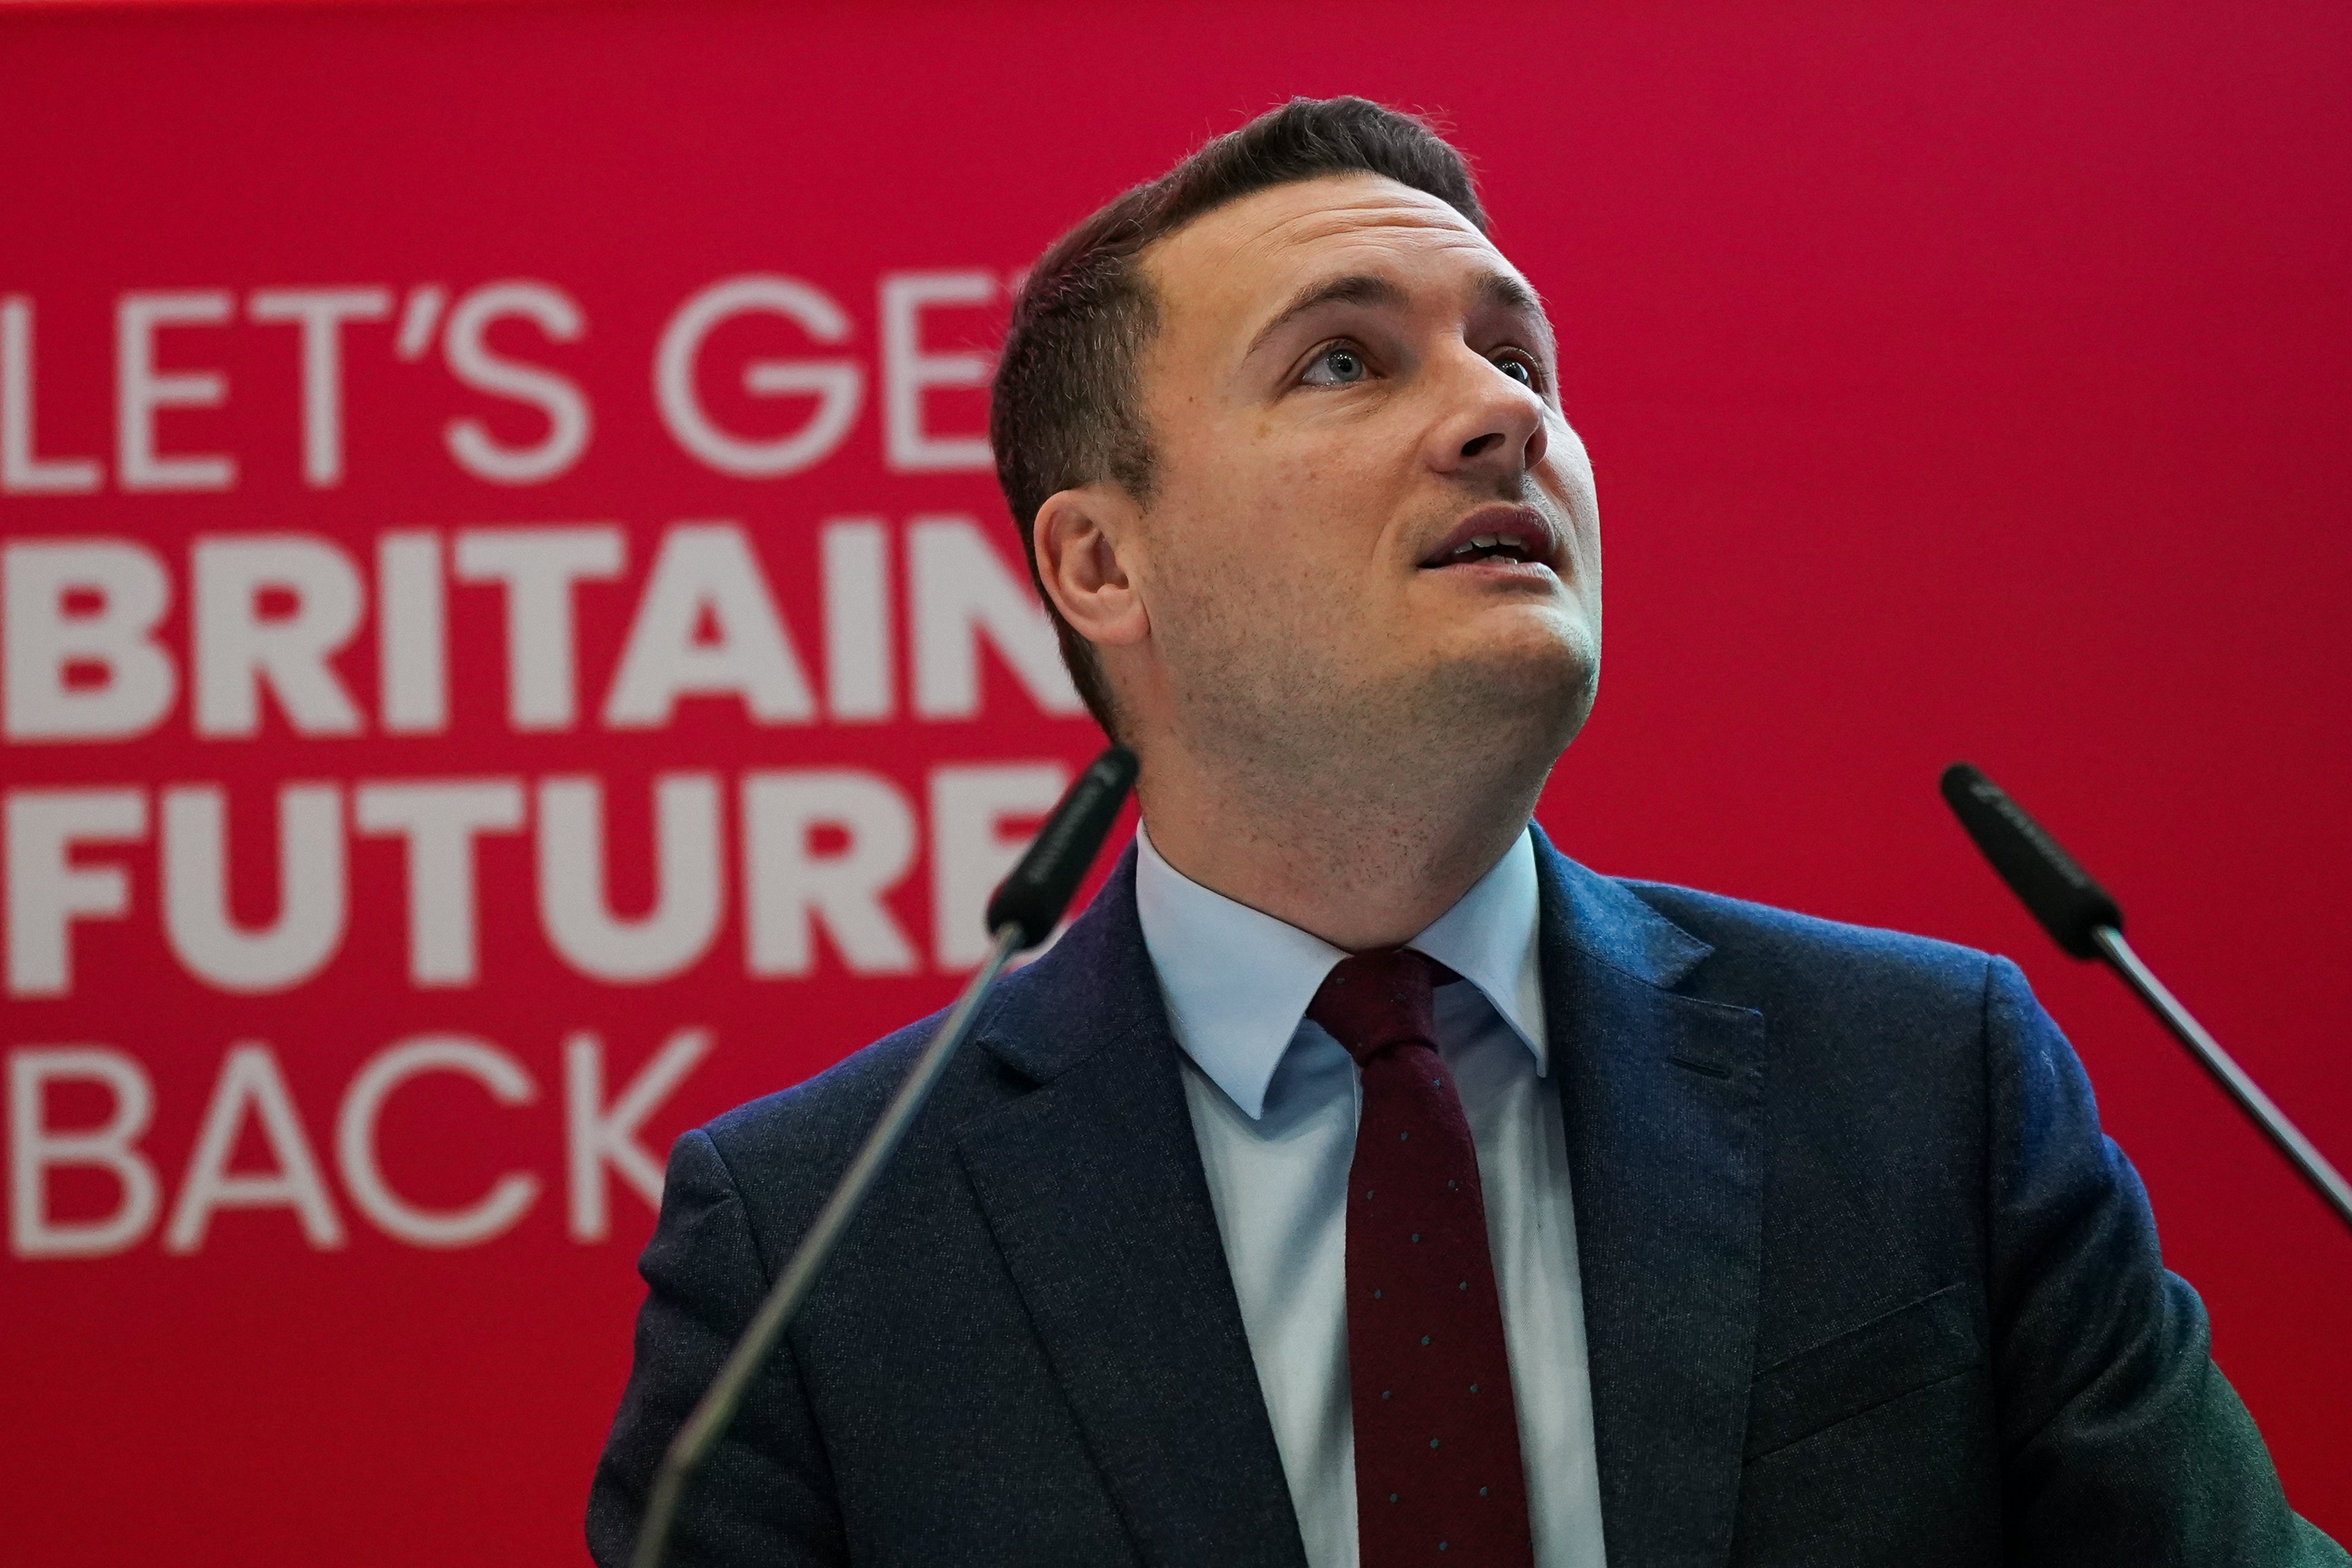 Streeting came out as gay in his second year of university